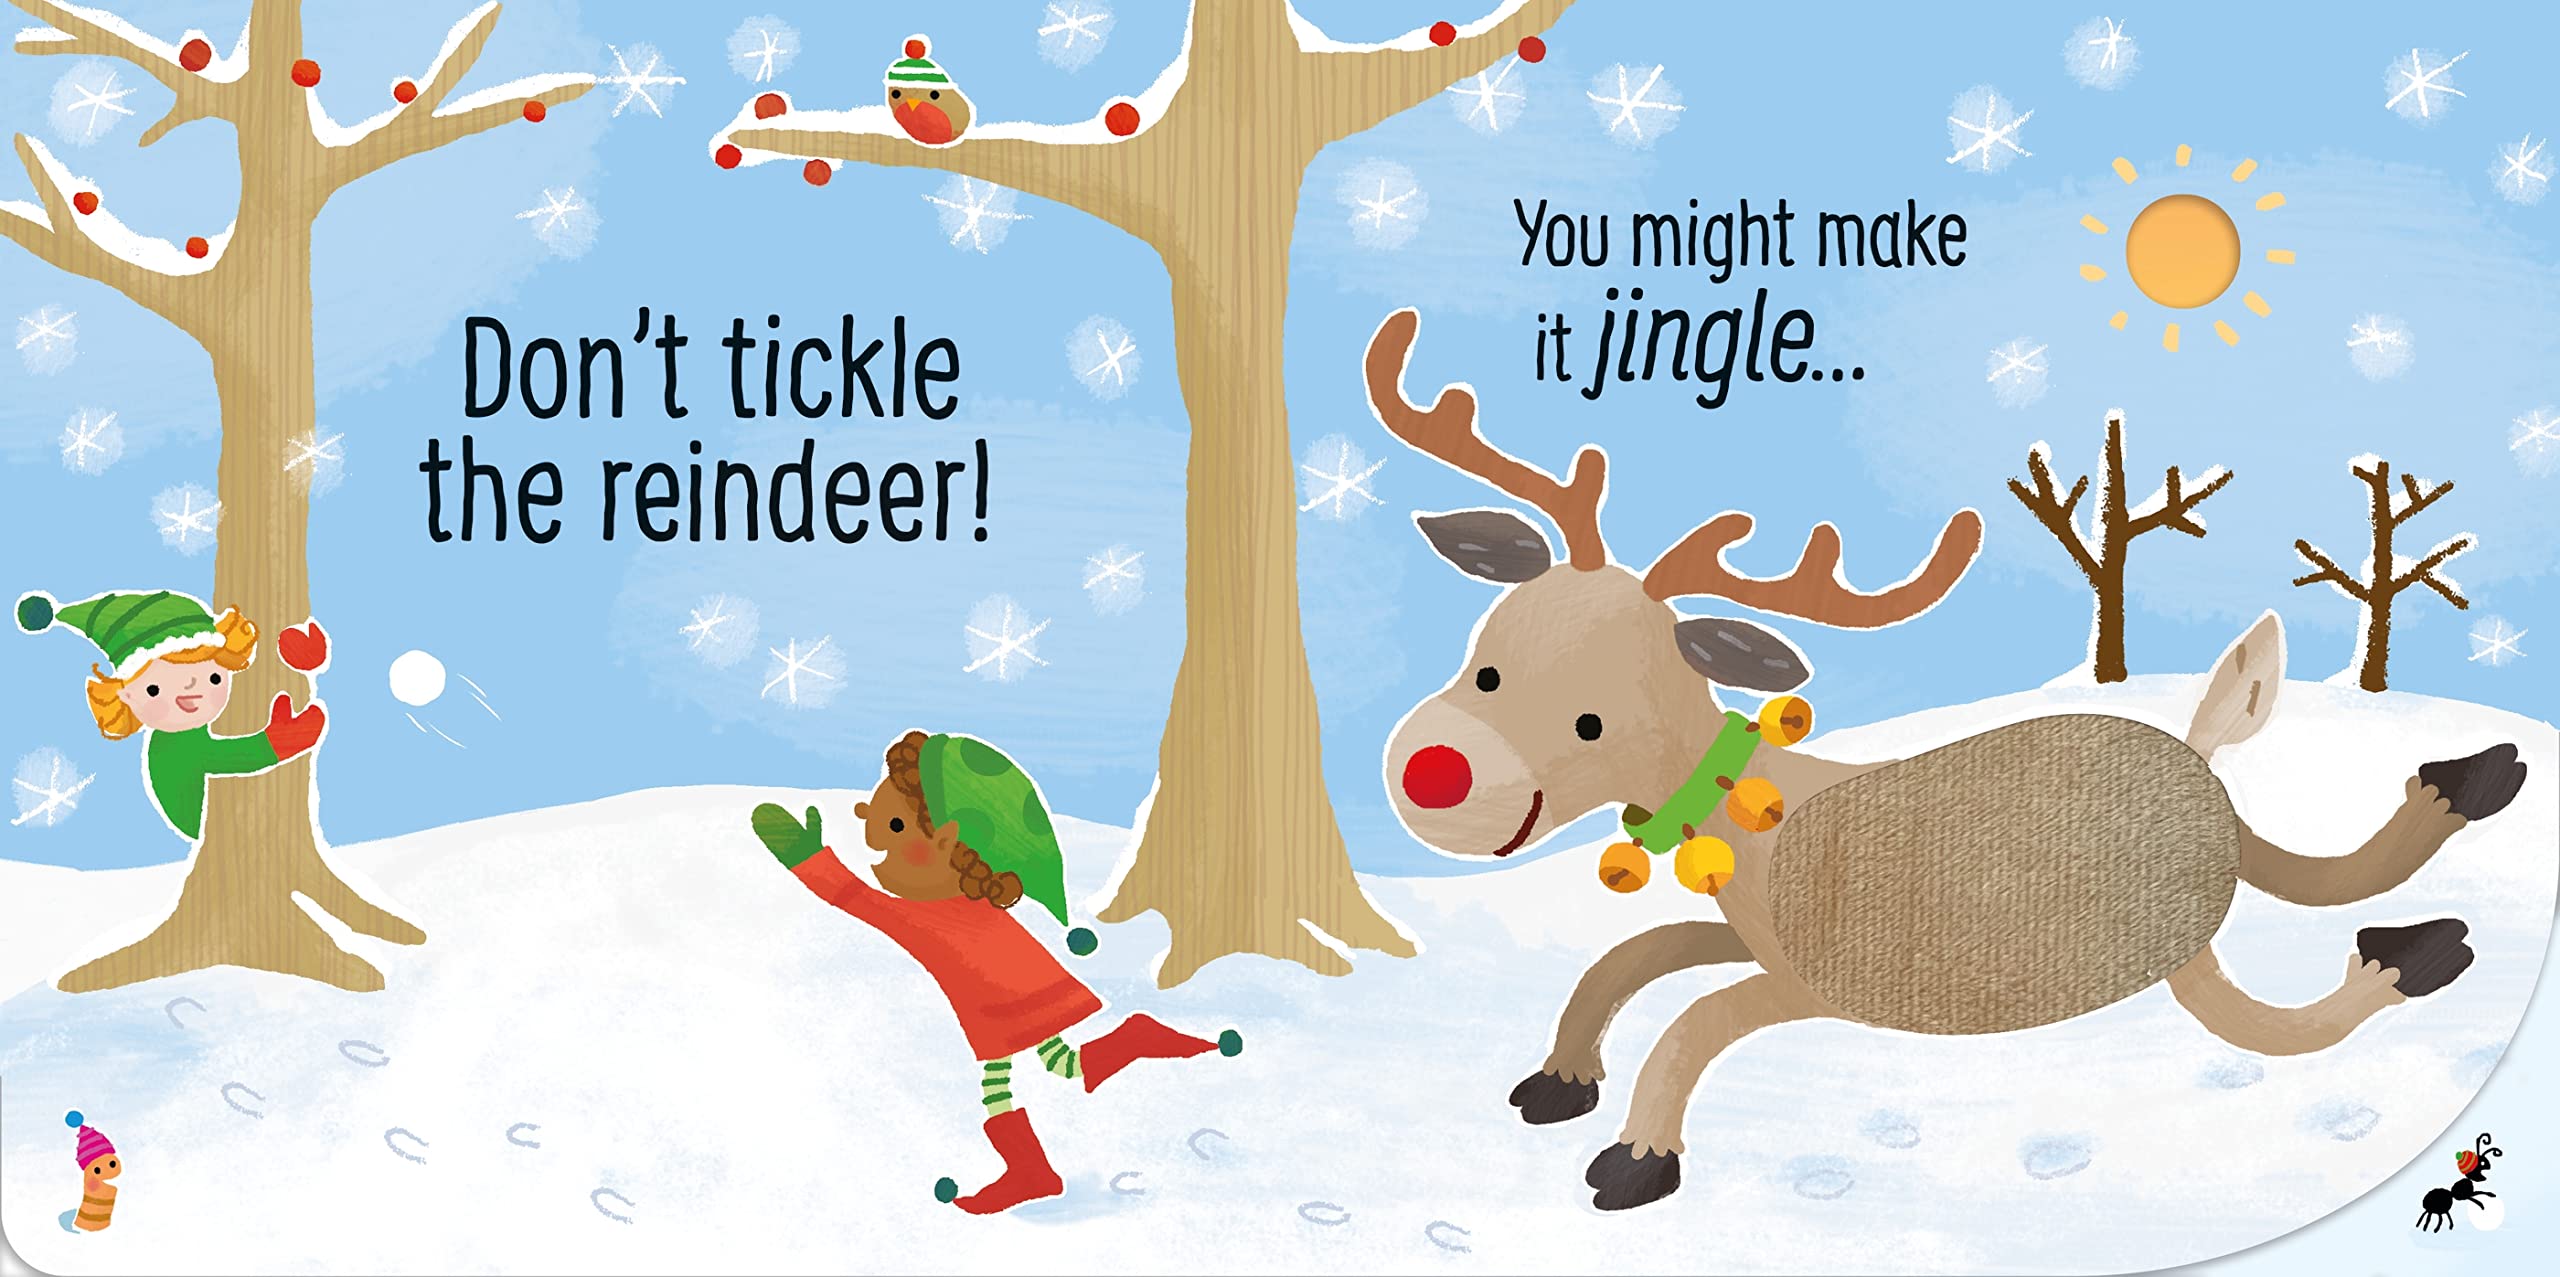 Don't Tickle the Reindeer! (Touchy-feely sound books)